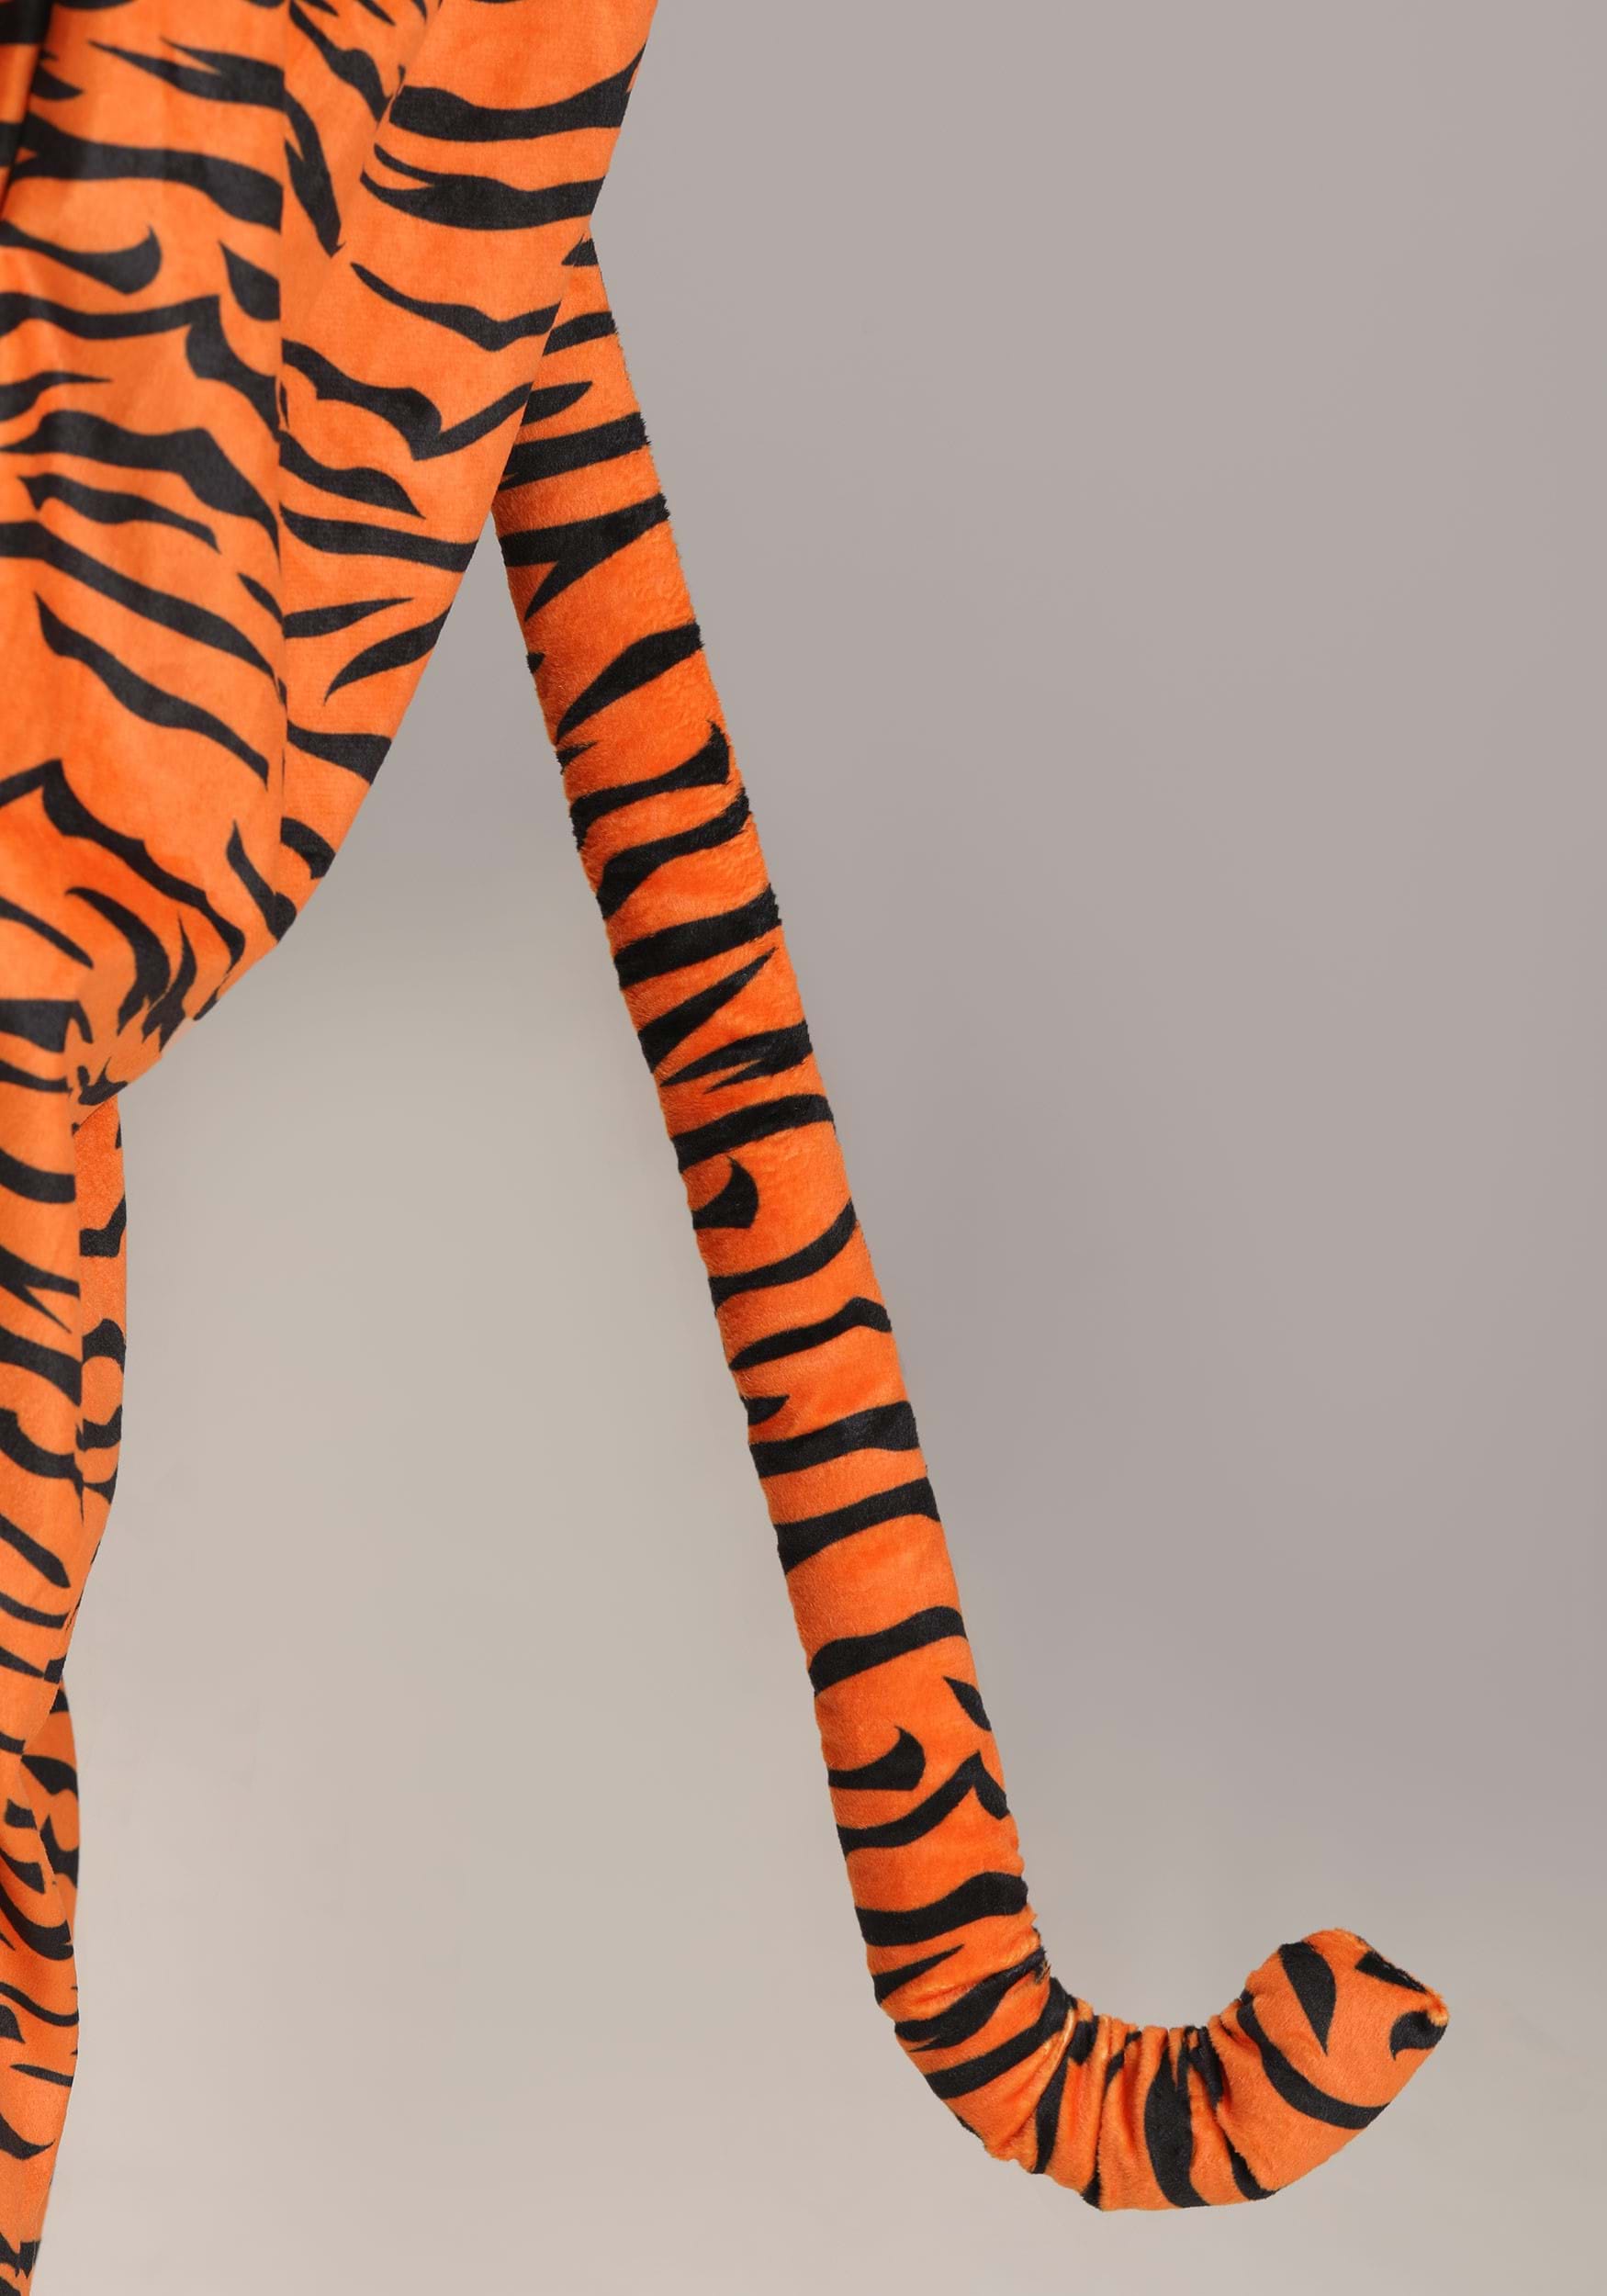 Jawesome Adult Tiger Fancy Dress Costume